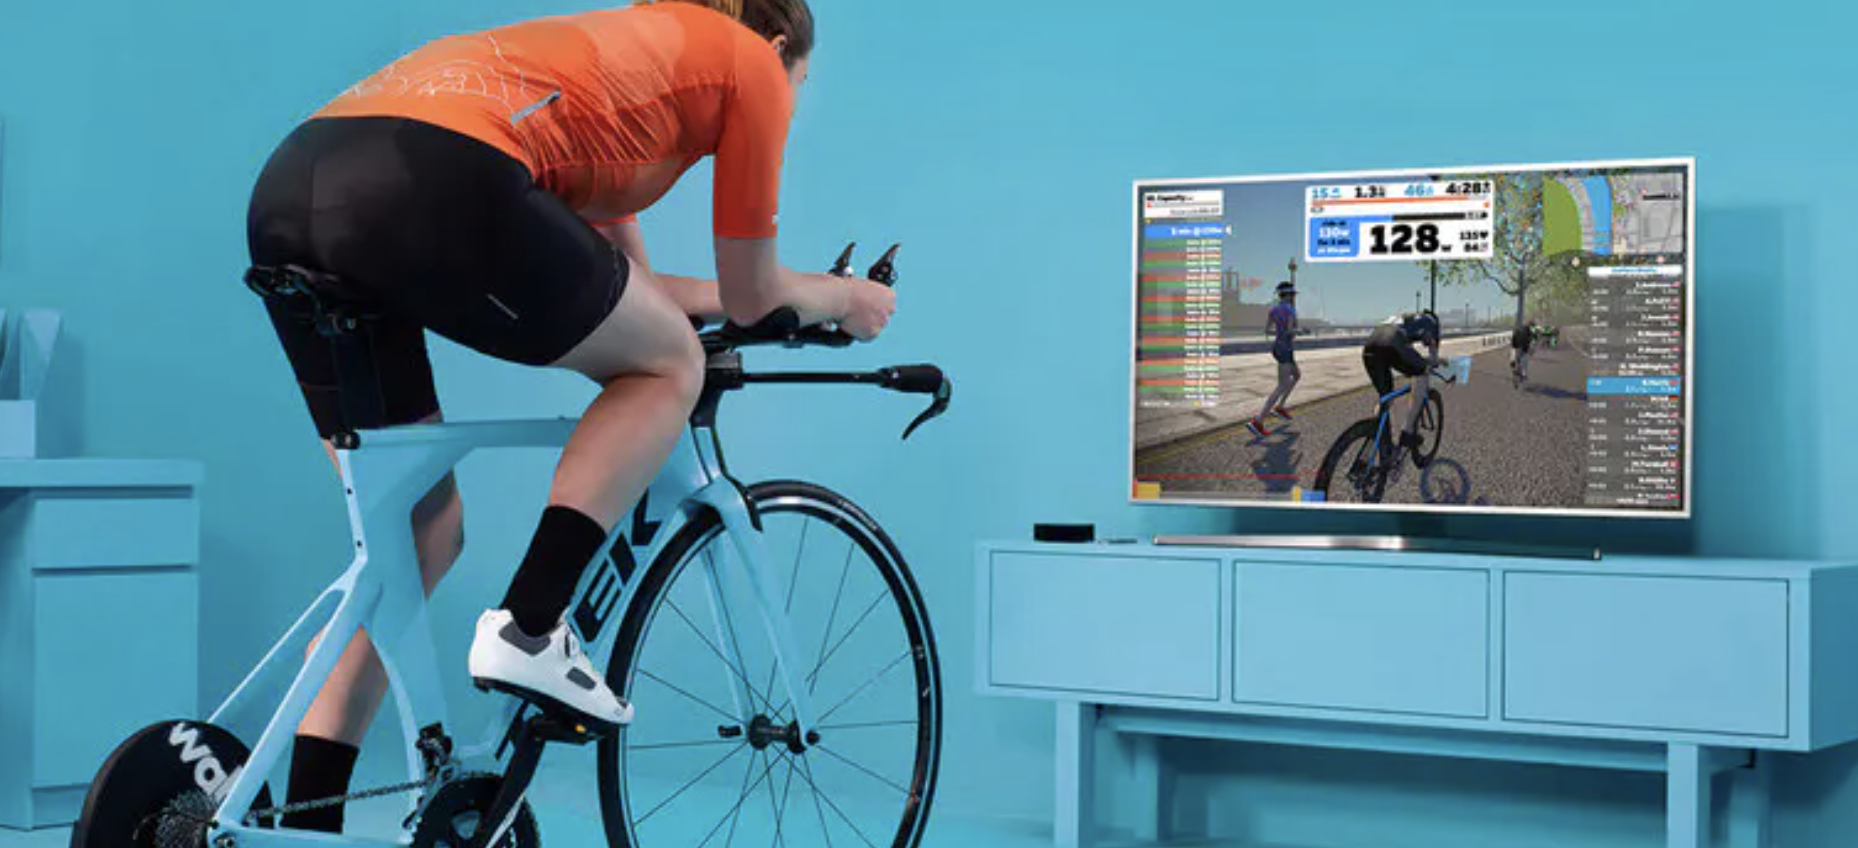 Zwift, maker of a popular indoor training app, just landed a whopping $450 million in funding led by | TechCrunch